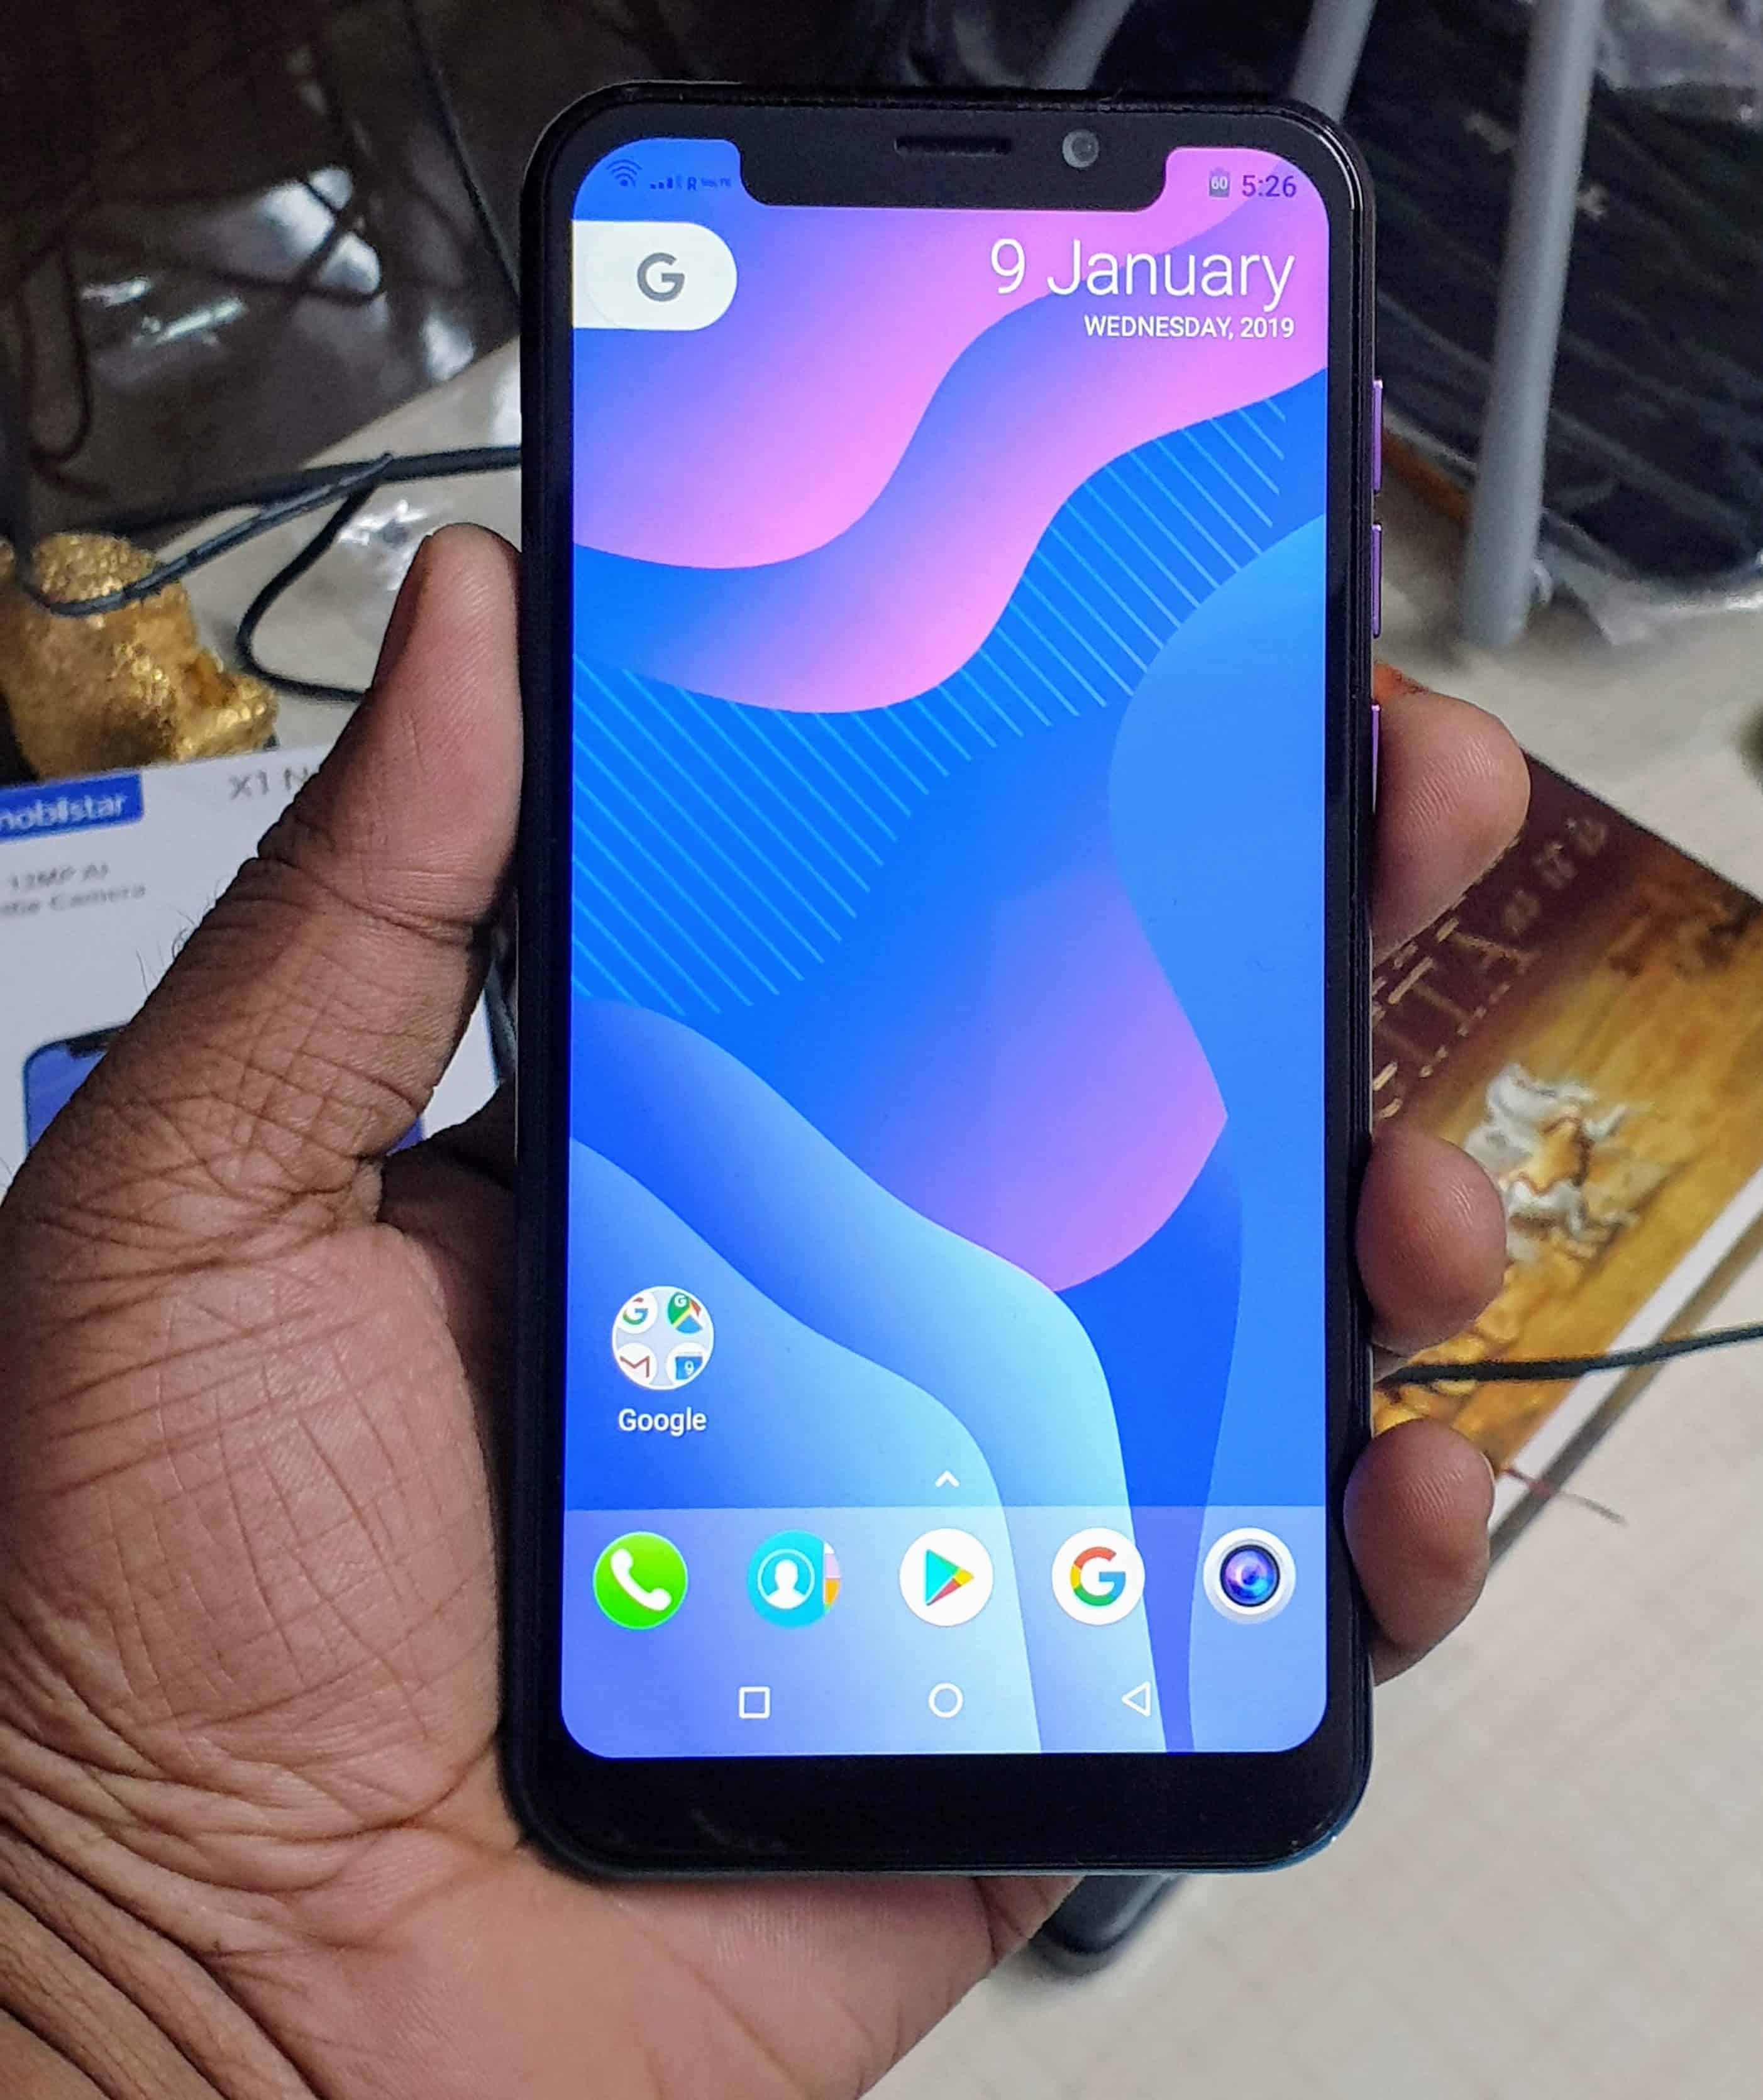 Mobiistar X1 Notch Hands-on Review - My First Impressions! - 5